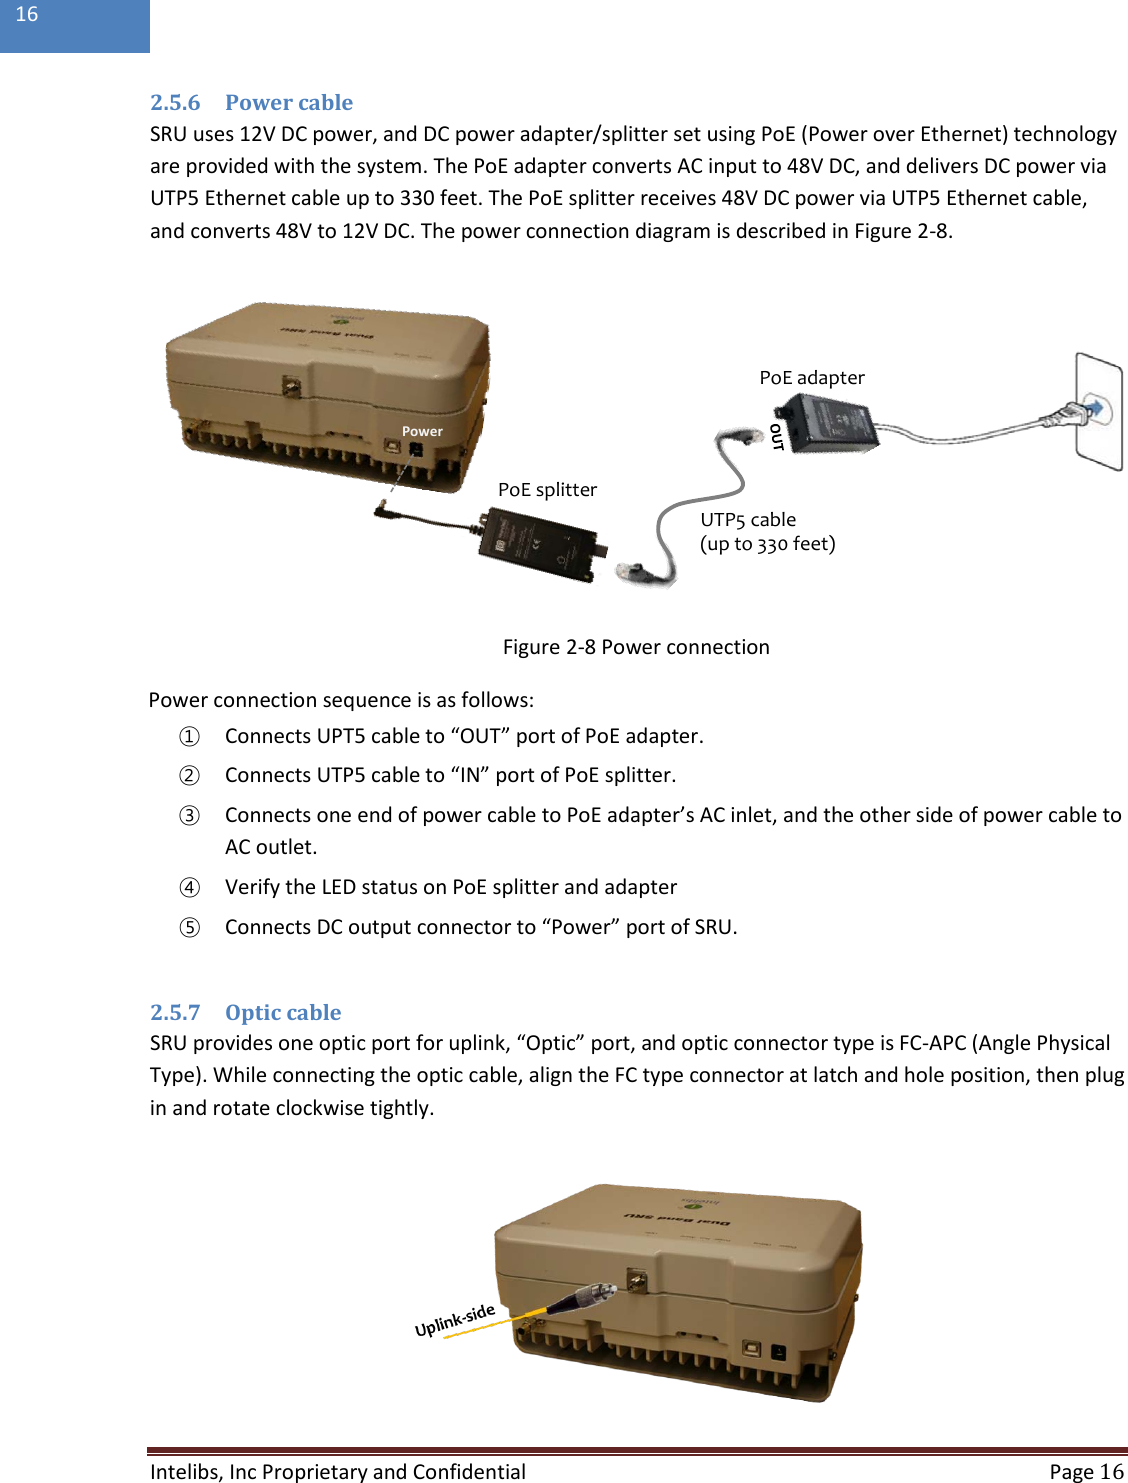  Intelibs, Inc Proprietary and Confidential  Page 16  16  2.5.6 Power cable SRU uses 12V DC power, and DC power adapter/splitter set using PoE (Power over Ethernet) technology are provided with the system. The PoE adapter converts AC input to 48V DC, and delivers DC power via UTP5 Ethernet cable up to 330 feet. The PoE splitter receives 48V DC power via UTP5 Ethernet cable, and converts 48V to 12V DC. The power connection diagram is described in Figure 2-8.  Figure 2-8 Power connection Power connection sequence is as follows: ① Connects UPT5 cable to “OUT” port of PoE adapter. ② Connects UTP5 cable to “IN” port of PoE splitter. ③ Connects one end of power cable to PoE adapter’s AC inlet, and the other side of power cable to AC outlet. ④ Verify the LED status on PoE splitter and adapter  ⑤ Connects DC output connector to “Power” port of SRU.  2.5.7 Optic cable SRU provides one optic port for uplink, “Optic” port, and optic connector type is FC-APC (Angle Physical Type). While connecting the optic cable, align the FC type connector at latch and hole position, then plug in and rotate clockwise tightly.  PoE adapterPoE splitterUTP5 cable(up to 330 feet)Power